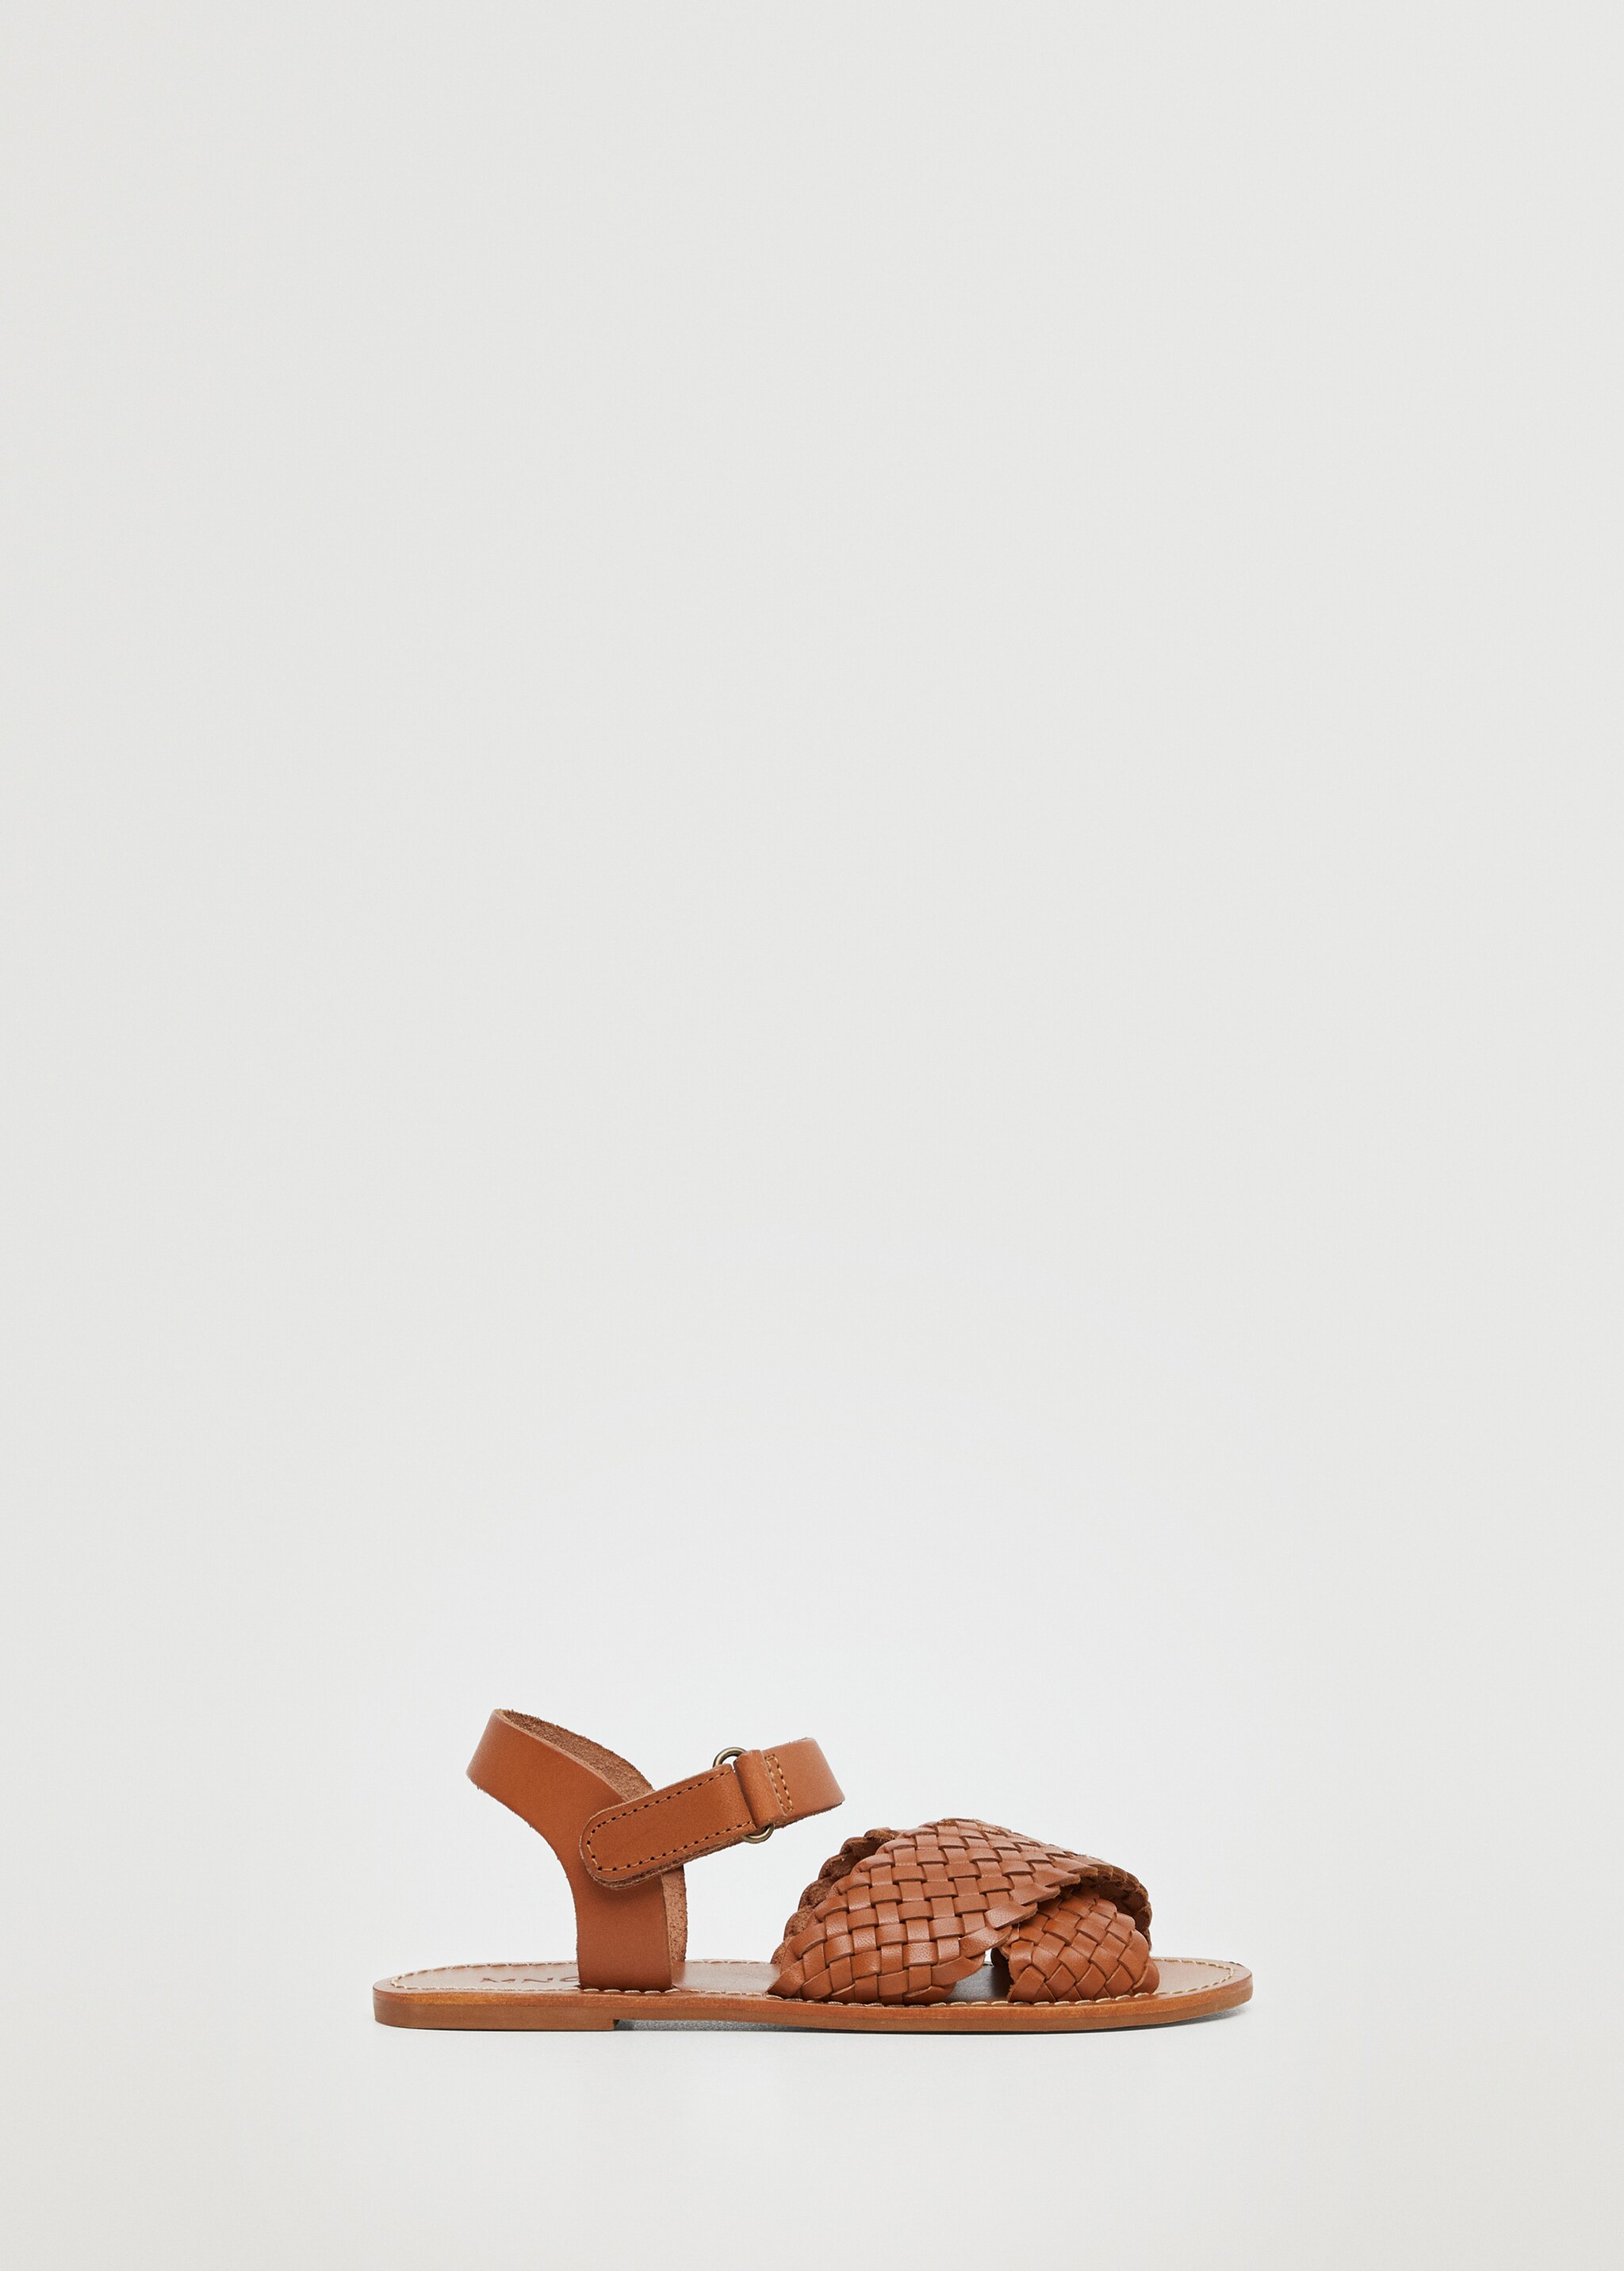 Leather braided sandals - Article without model